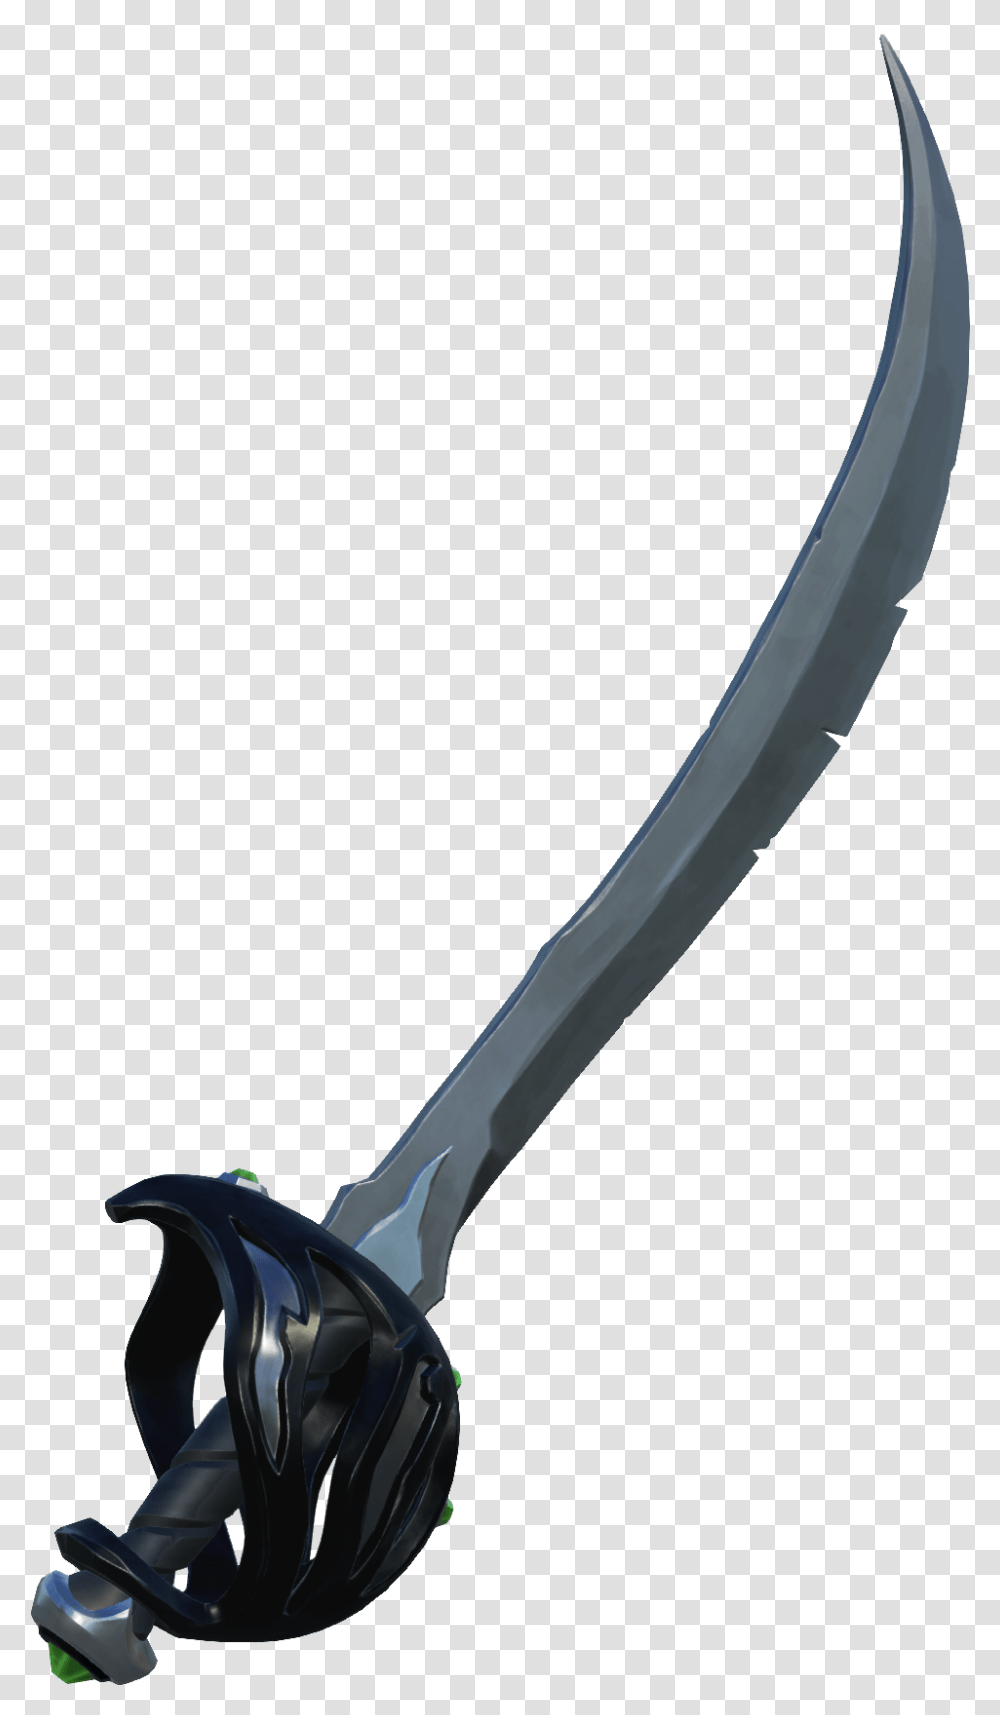 Sea Of Thieves Black Dog Pack Cutlass Sea Of Thieves Pirate Sword, Blade, Weapon, Weaponry Transparent Png